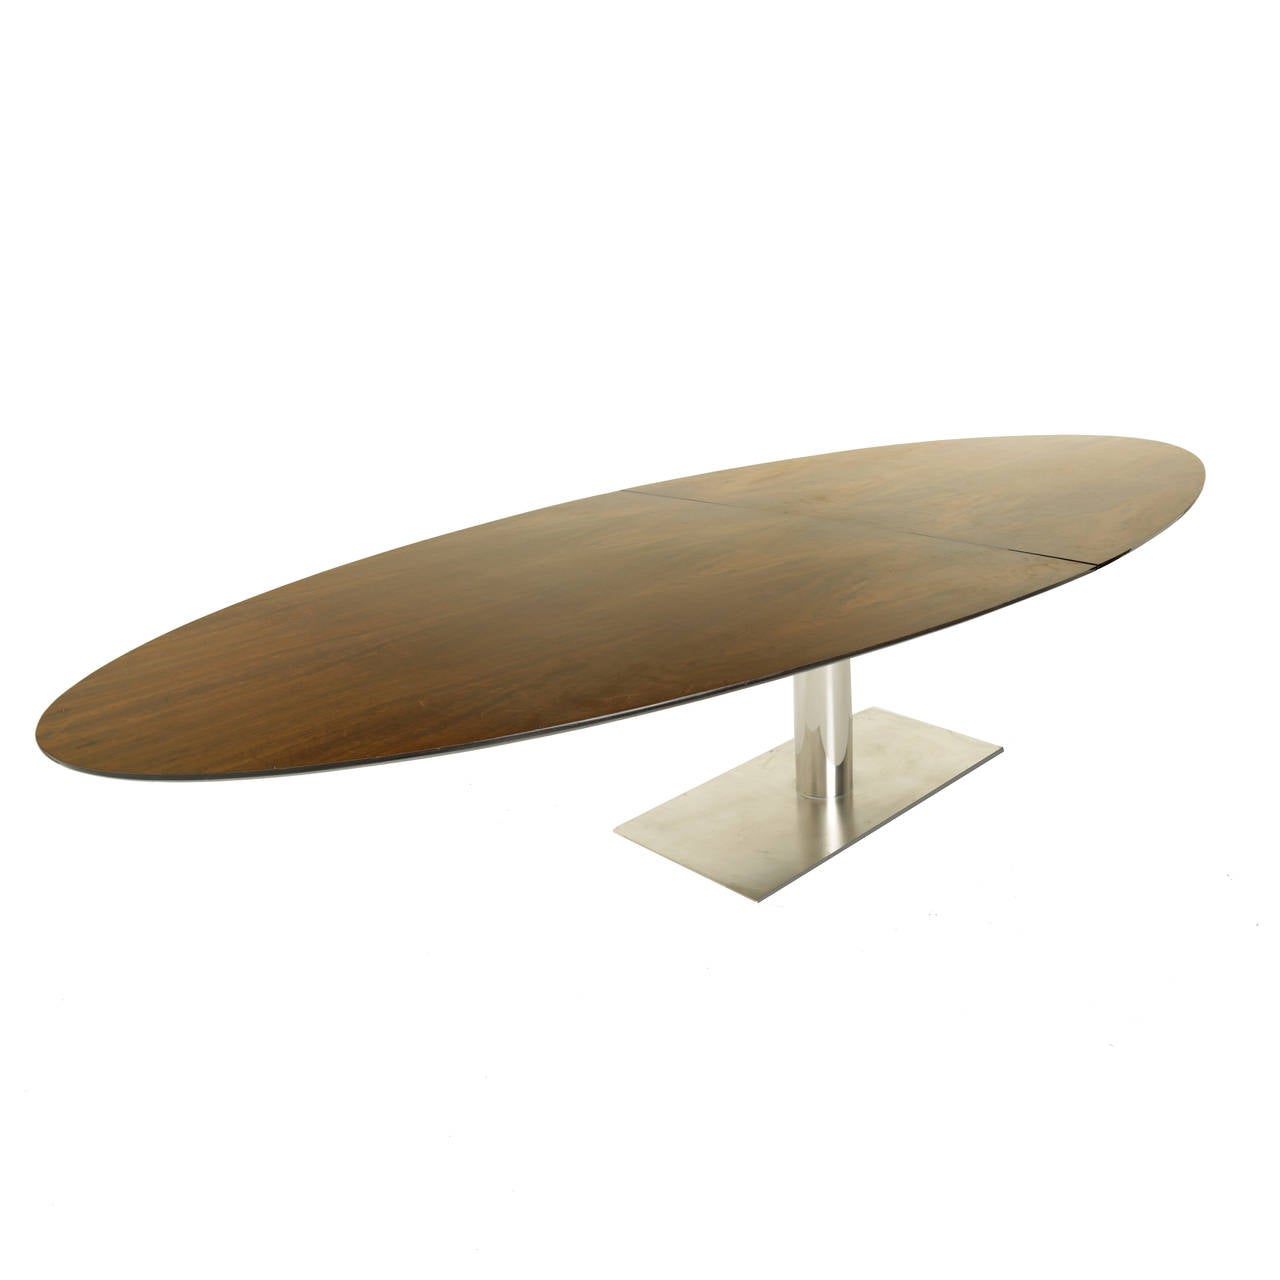 Brazilian Oval Imbuia Wood Dining Table with Stainless Base In Good Condition For Sale In Los Angeles, CA